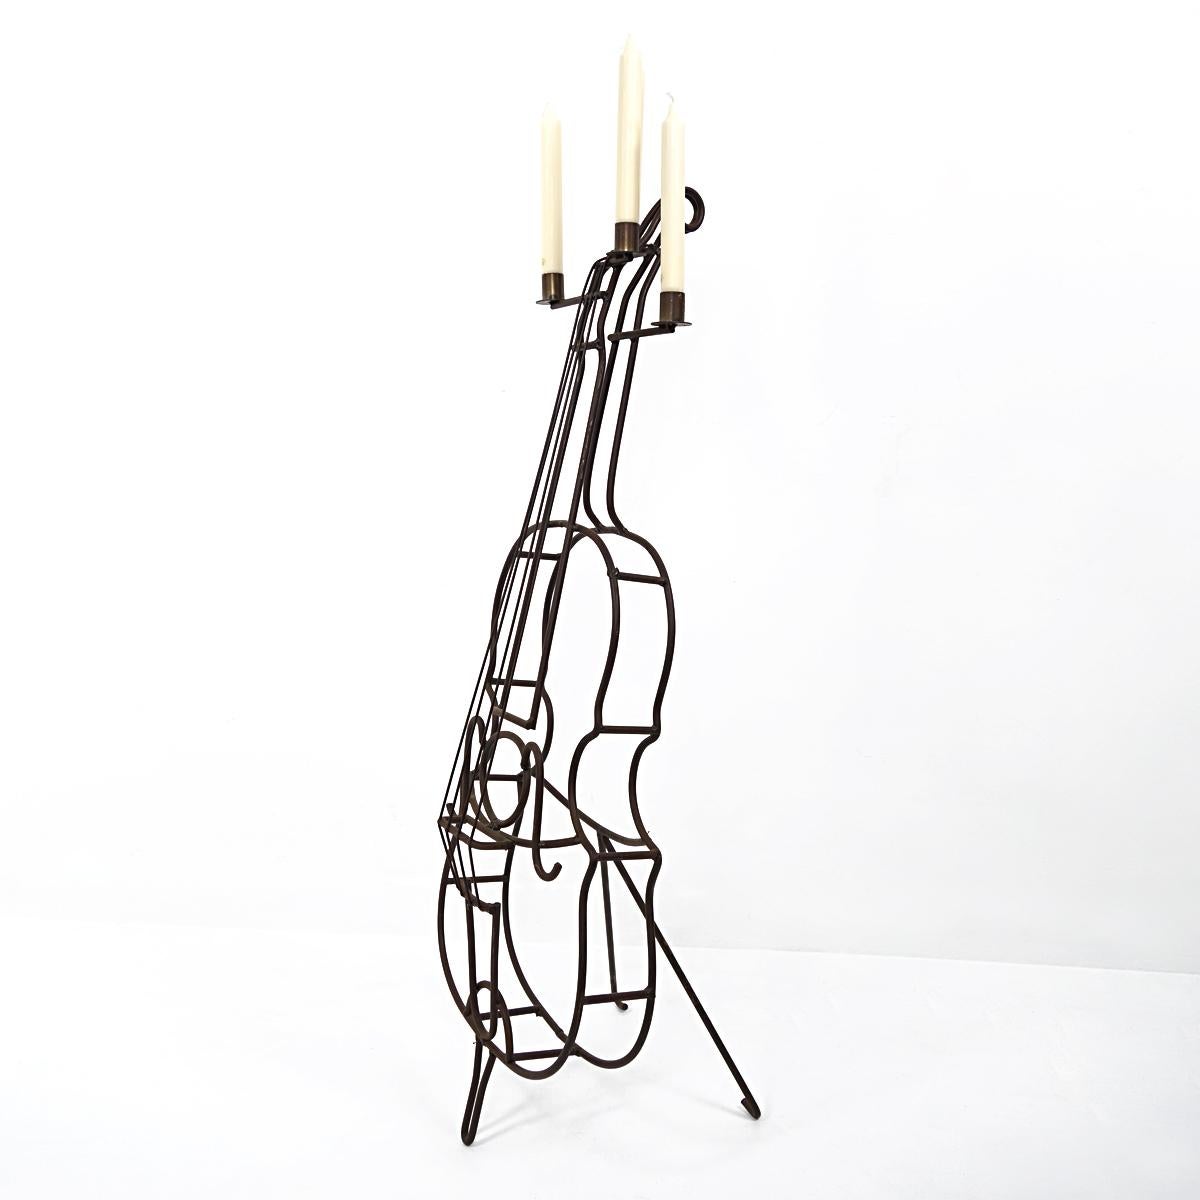 Large Mid-Century Modern Wire Steel Candle Holder in the Shape of a Cello For Sale 1